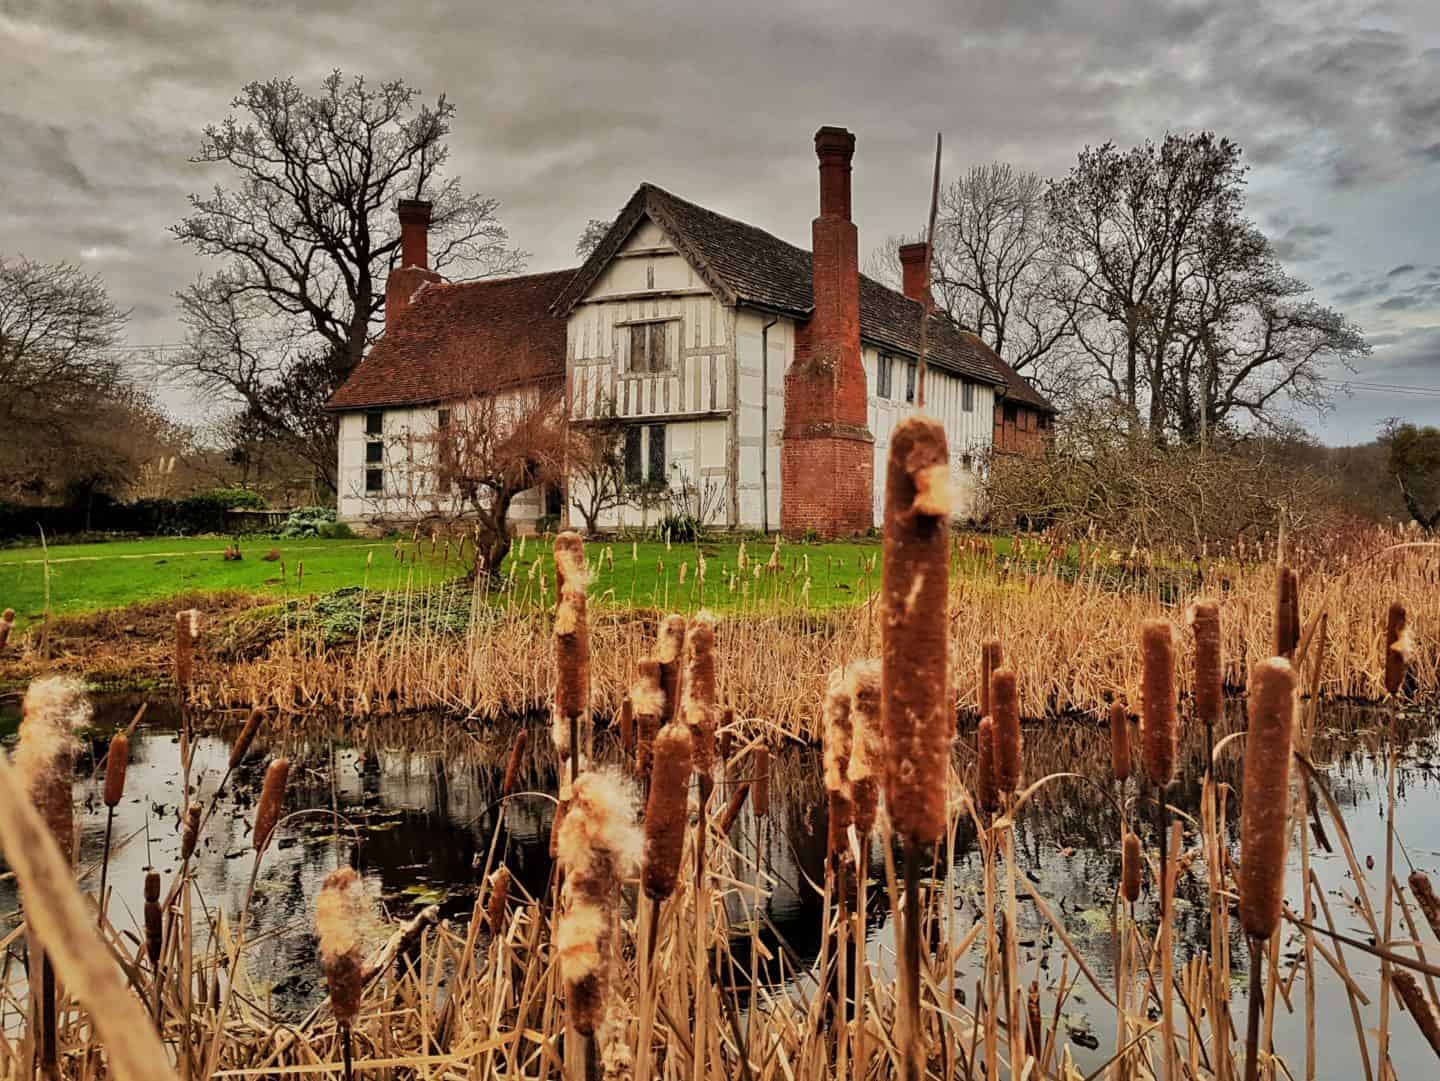 Brockhampton National Trust manor house in Herefordshire viewed from across a pond with reeds in foreground